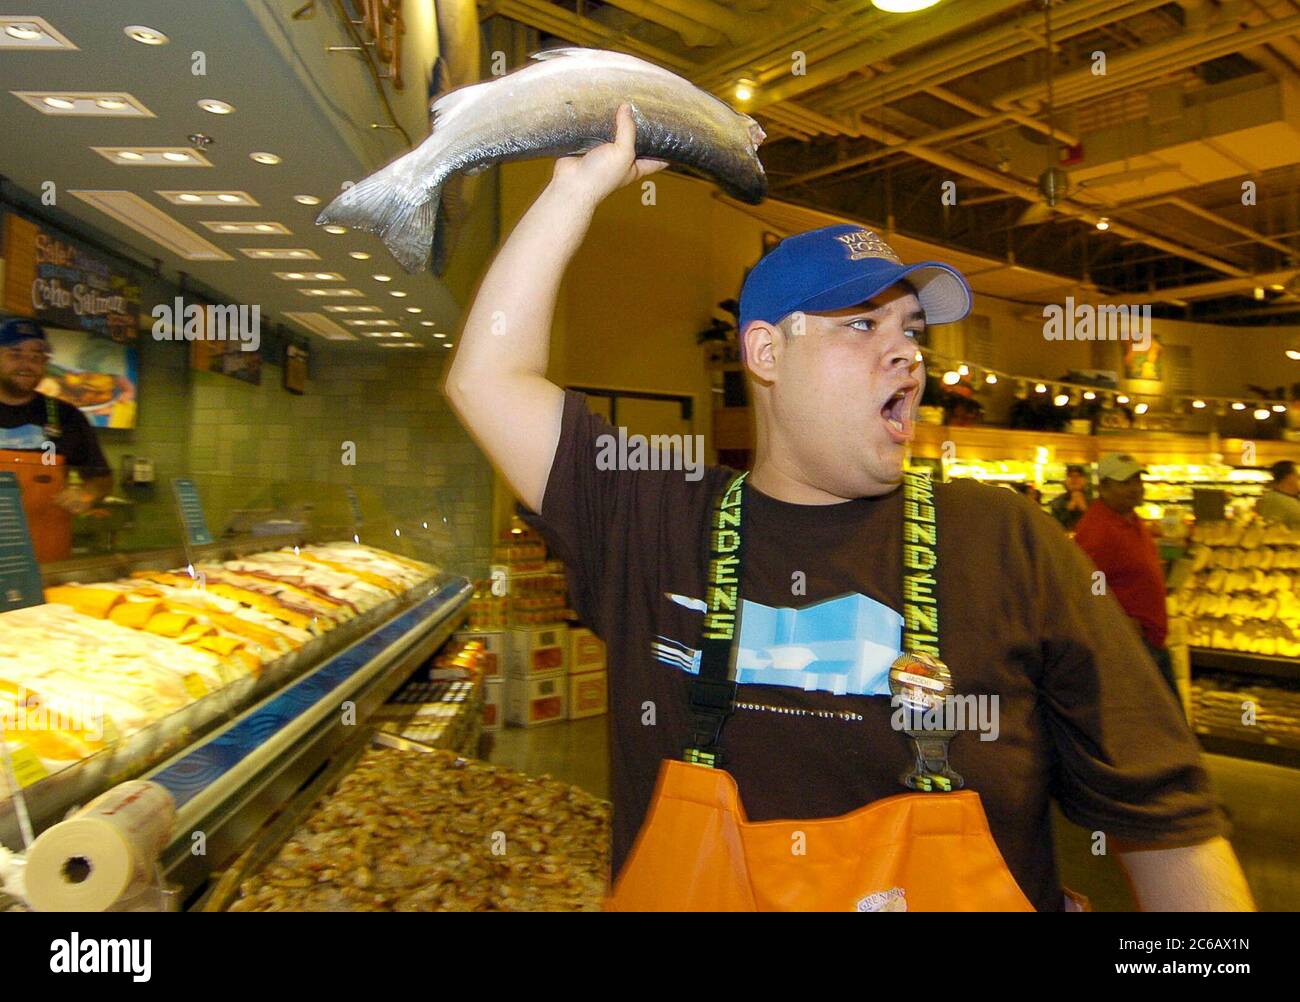 https://c8.alamy.com/comp/2C6AX1N/austin-texas-usa-march-3-2005-whole-foods-fish-market-employee-holds-aloft-a-fresh-fish-during-the-grand-opening-of-whole-foods-80000-square-foot-flagship-store-and-corporate-headquarters-in-austins-emerging-market-district-the-national-chain-has-167-stores-and-is-the-worlds-leading-natural-and-organic-supermarkets-bob-daemmrich-2C6AX1N.jpg